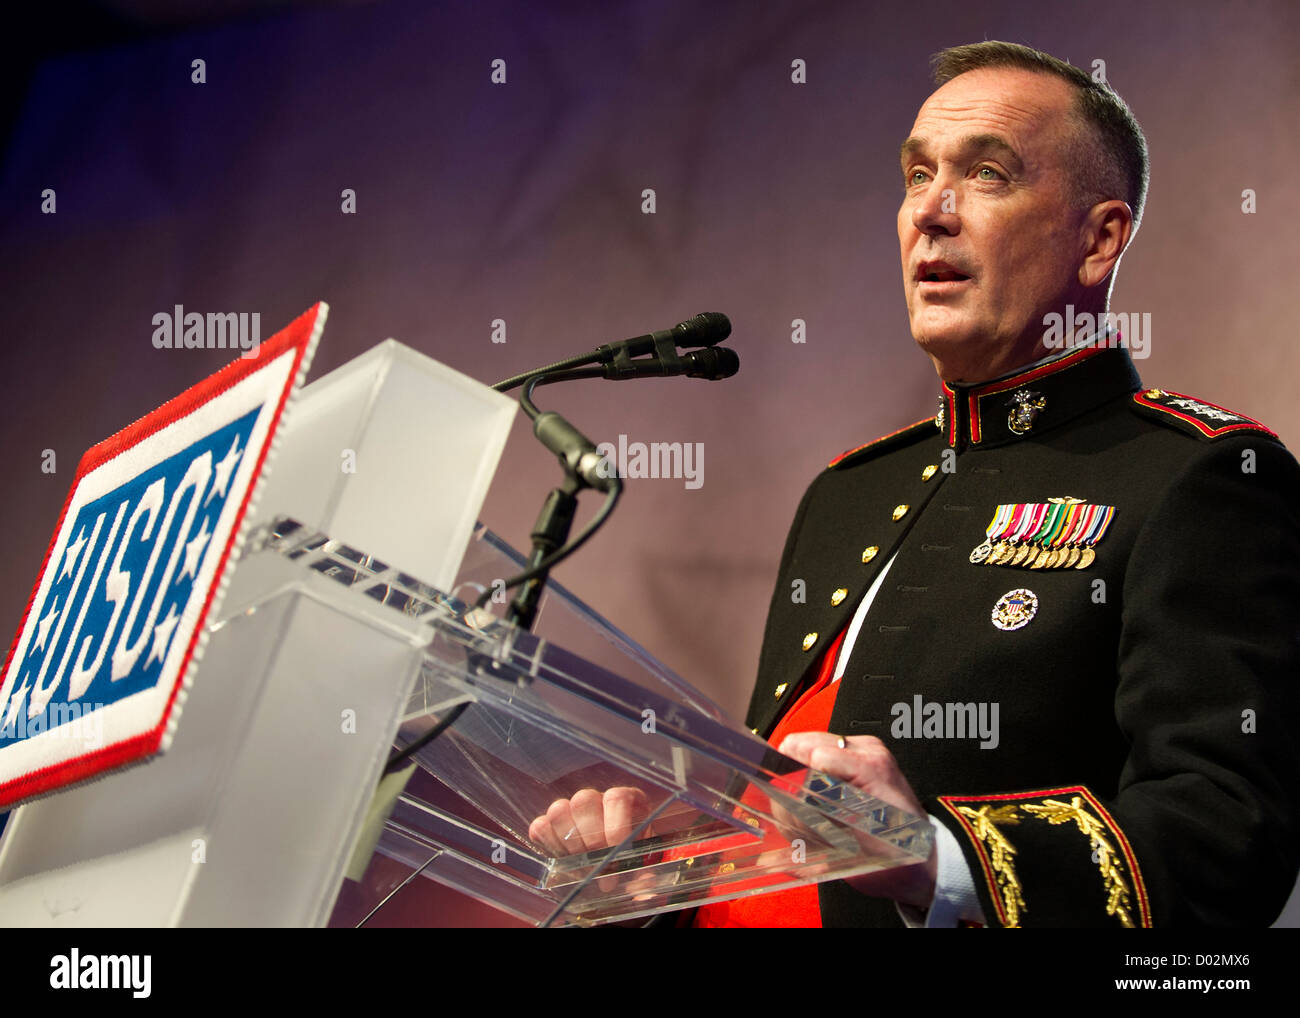 Marine General Joseph Dunford, assistant commandant of the Marine Corps delivers remarks at the 2012 USO Gala November 2, 2012 in Washington, DC. Stock Photo